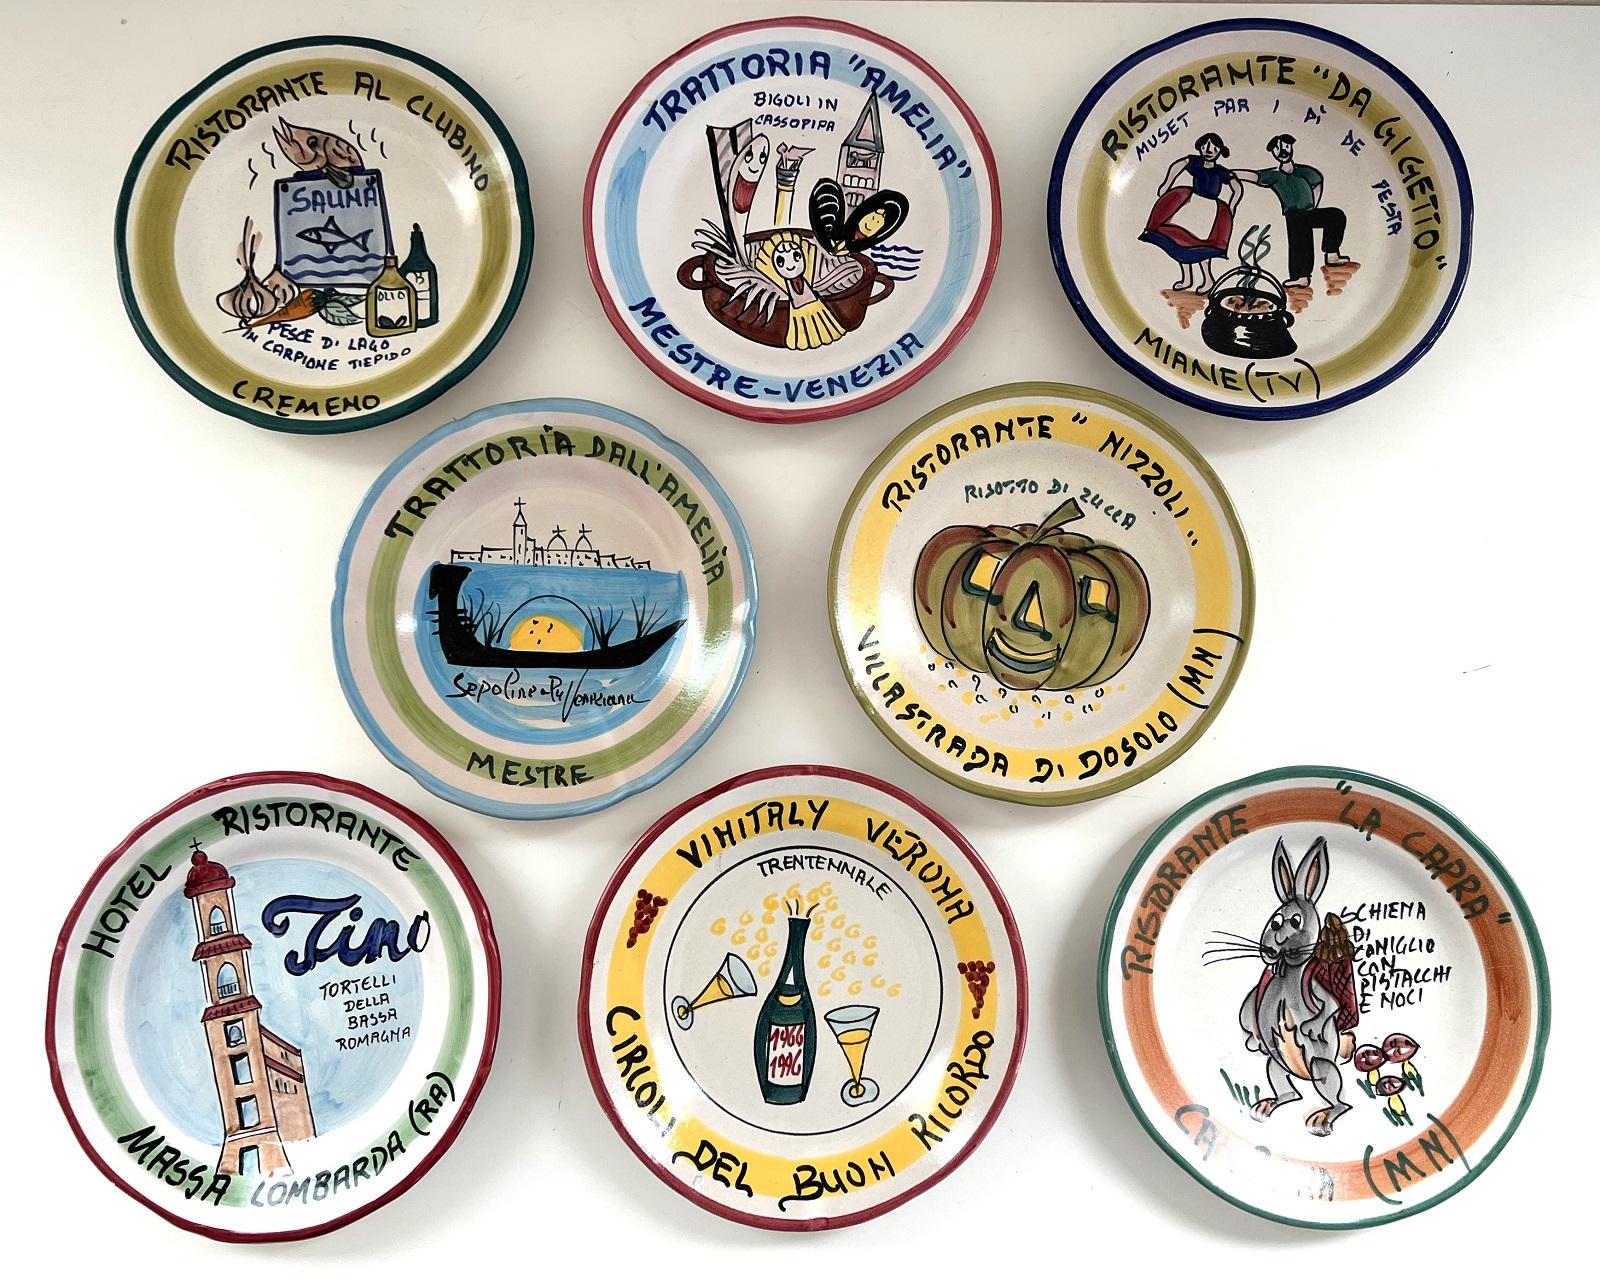 A set of 8 different restaurant collectible plates made of hand-painted ceramic.
Made in Italy in the 70s - 2000s.
These plates were not used in the restaurants.
They were given away by the restaurants, which are named on the plates, to the